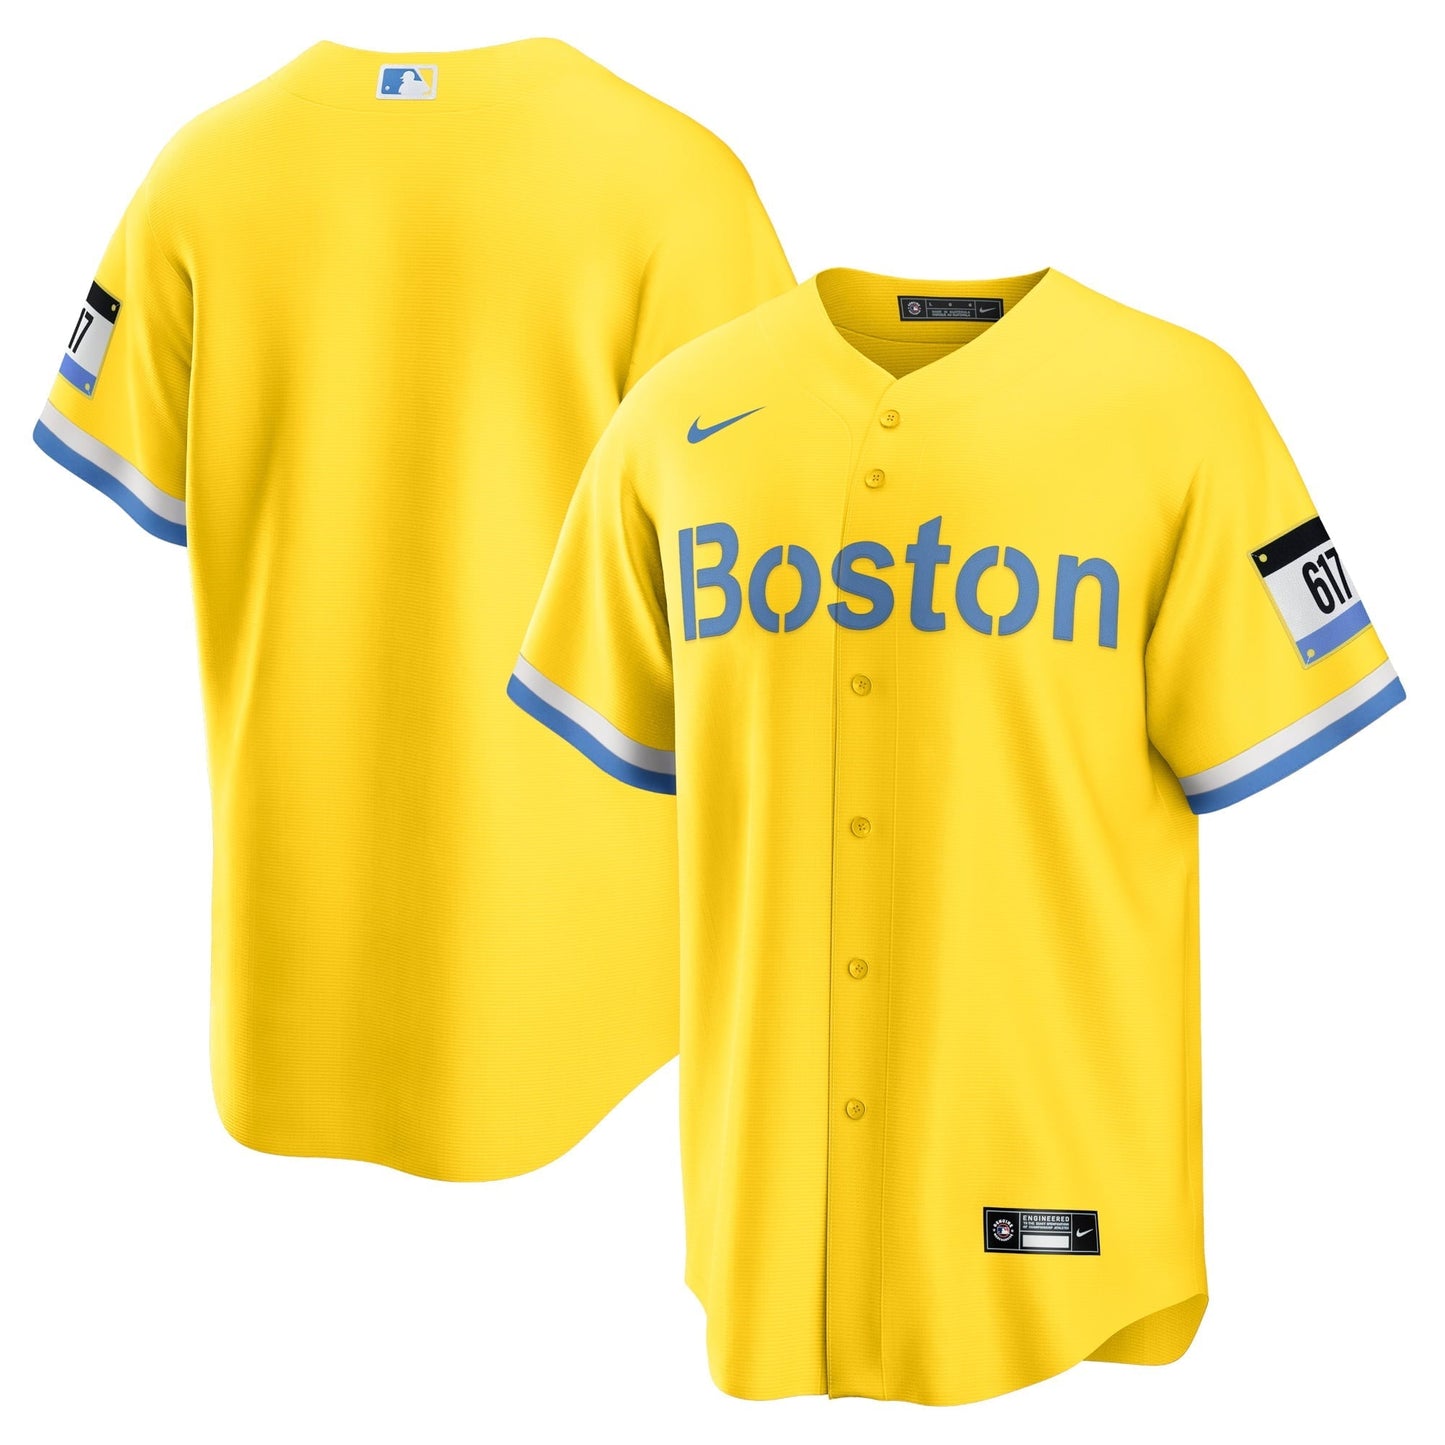 Men's Nike Gold/Light Blue Boston Red Sox City Connect Replica Jersey